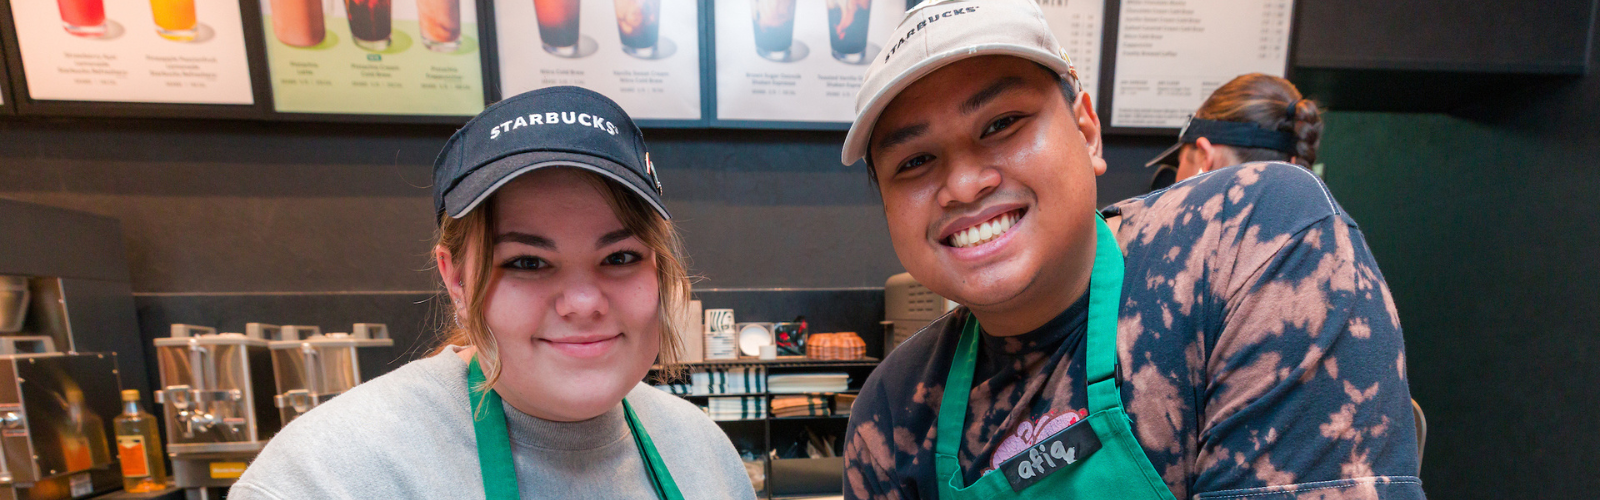 Student Starbucks workers smiling